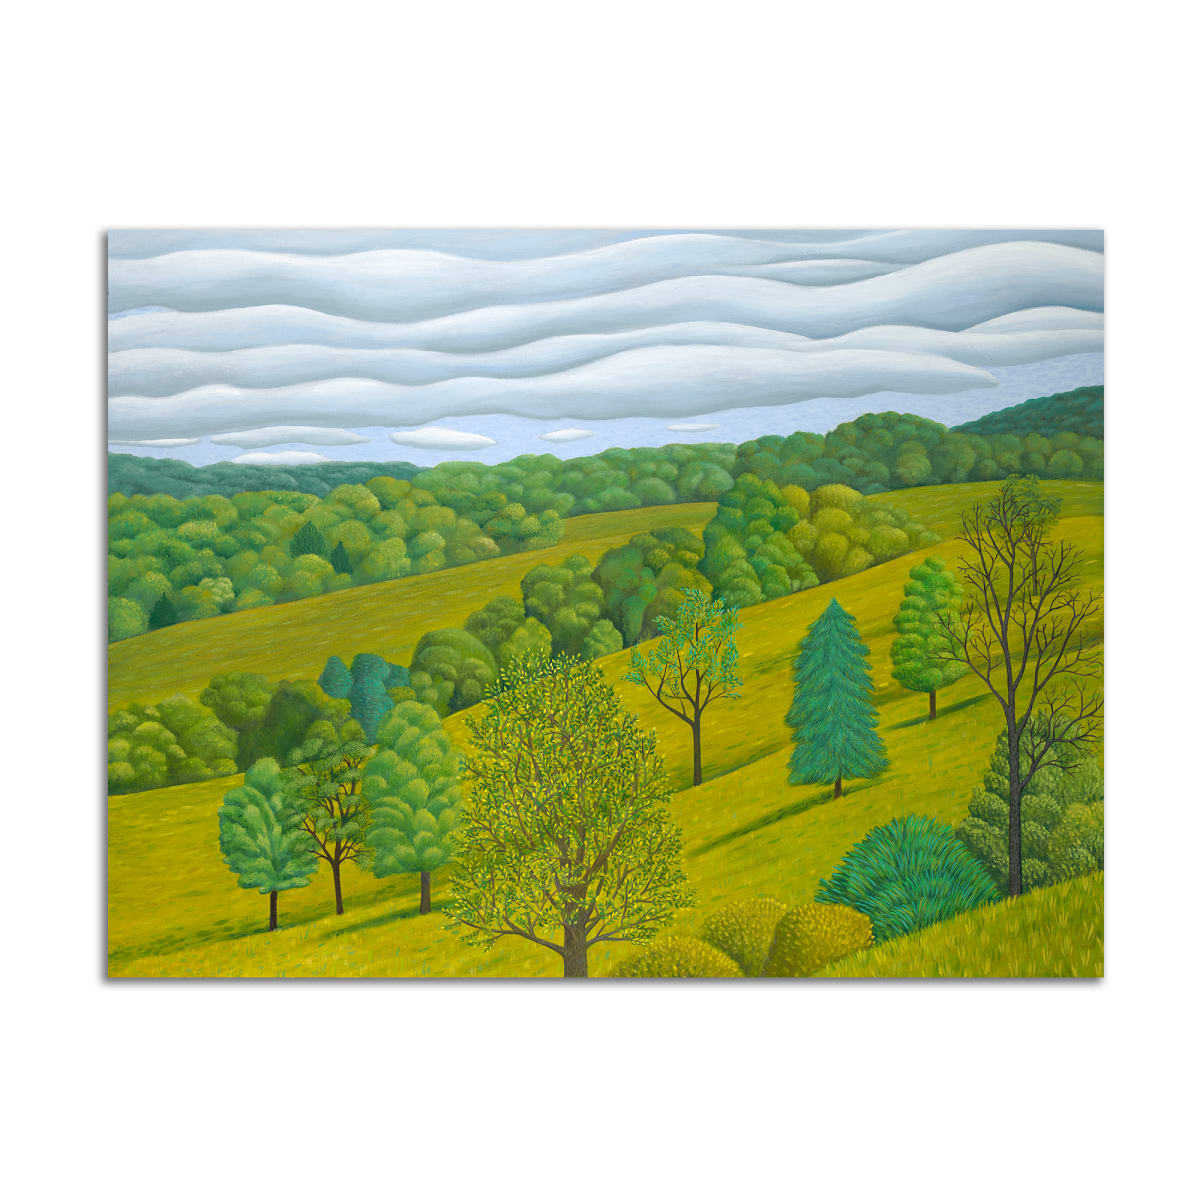 Clouds and Hills by Jane Troup 